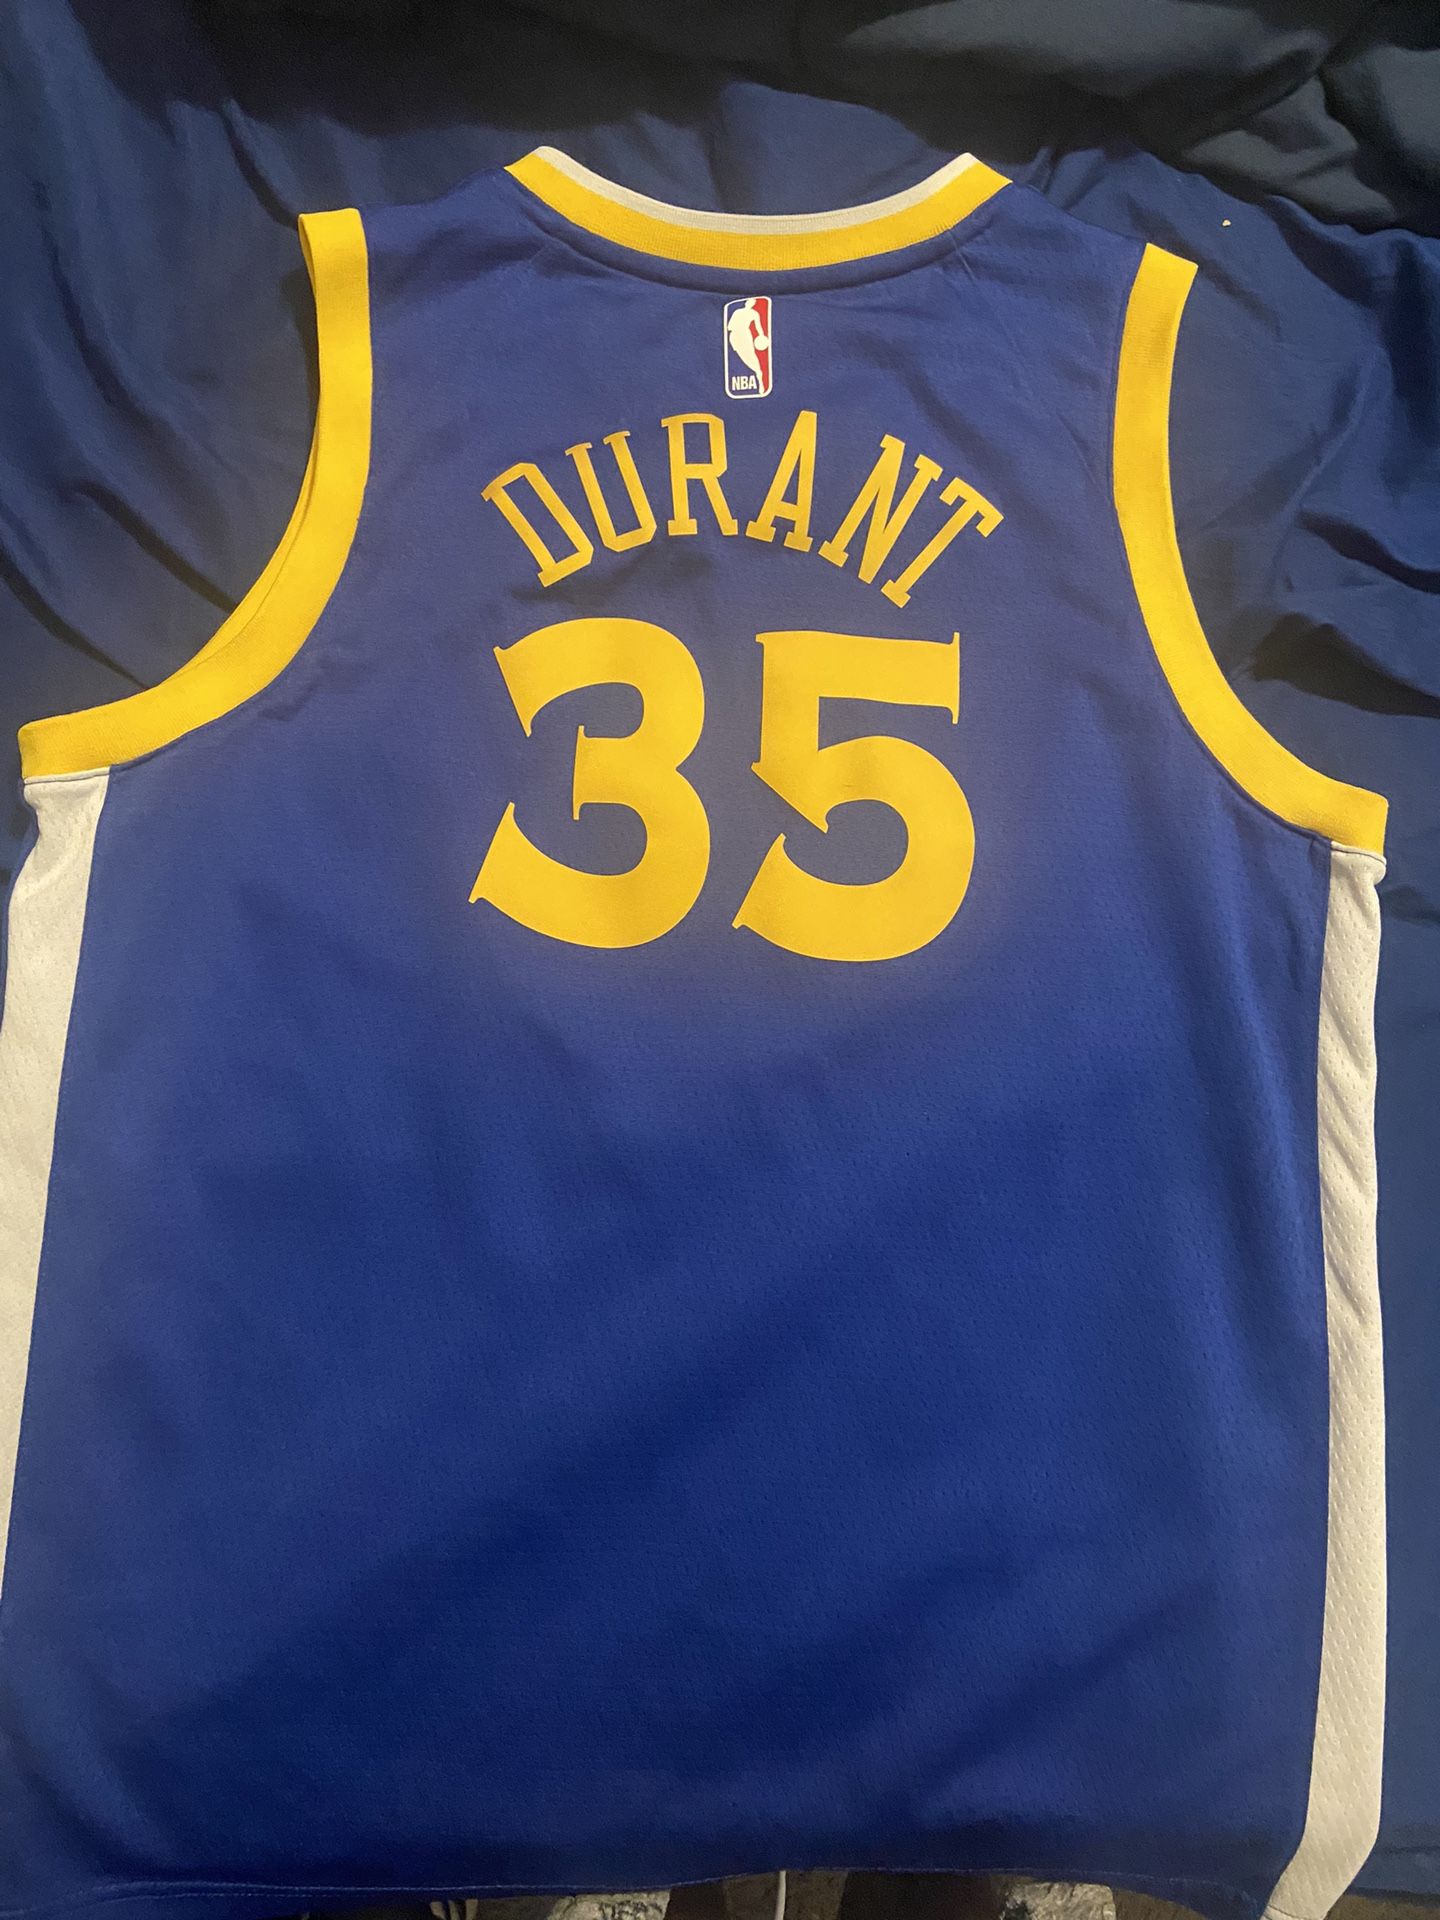 Blue And Yellow Kevin Durant Jersey 